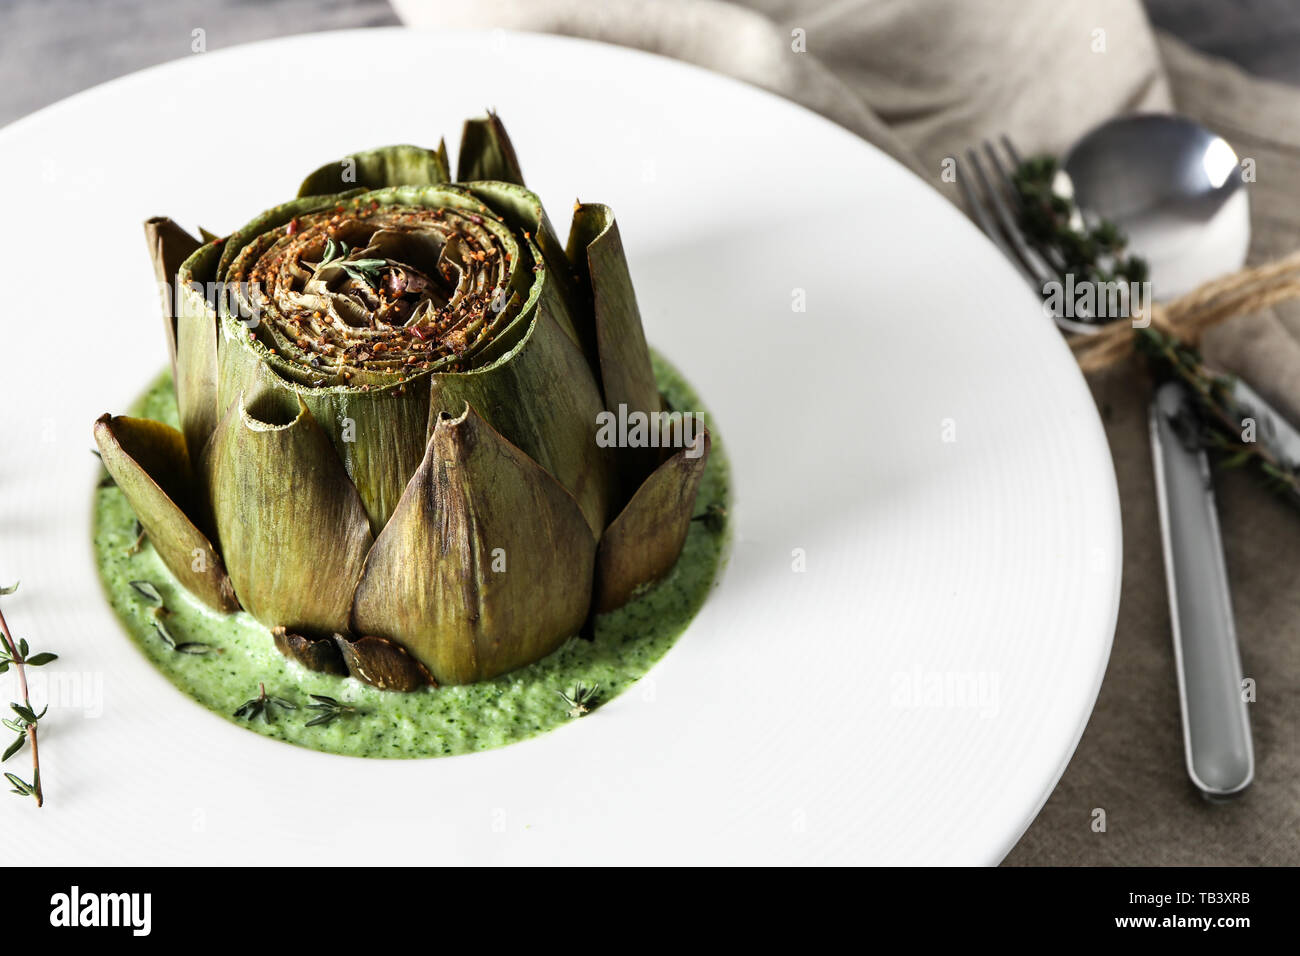 Plate with tasty cream soup and artichoke on table Stock Photo